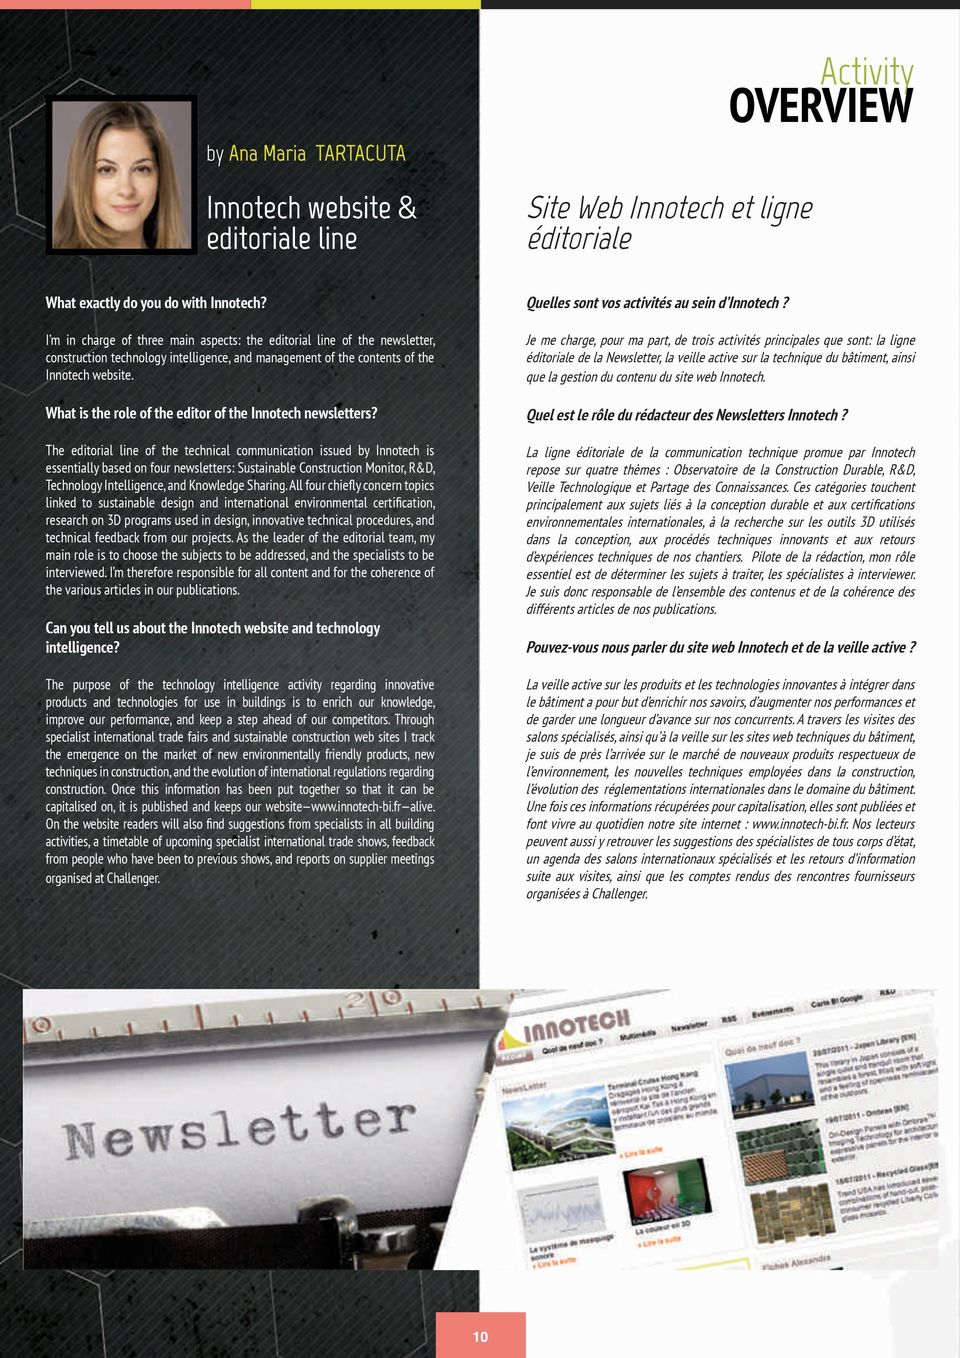 What is the role of the editor of the Innotech newsletters?